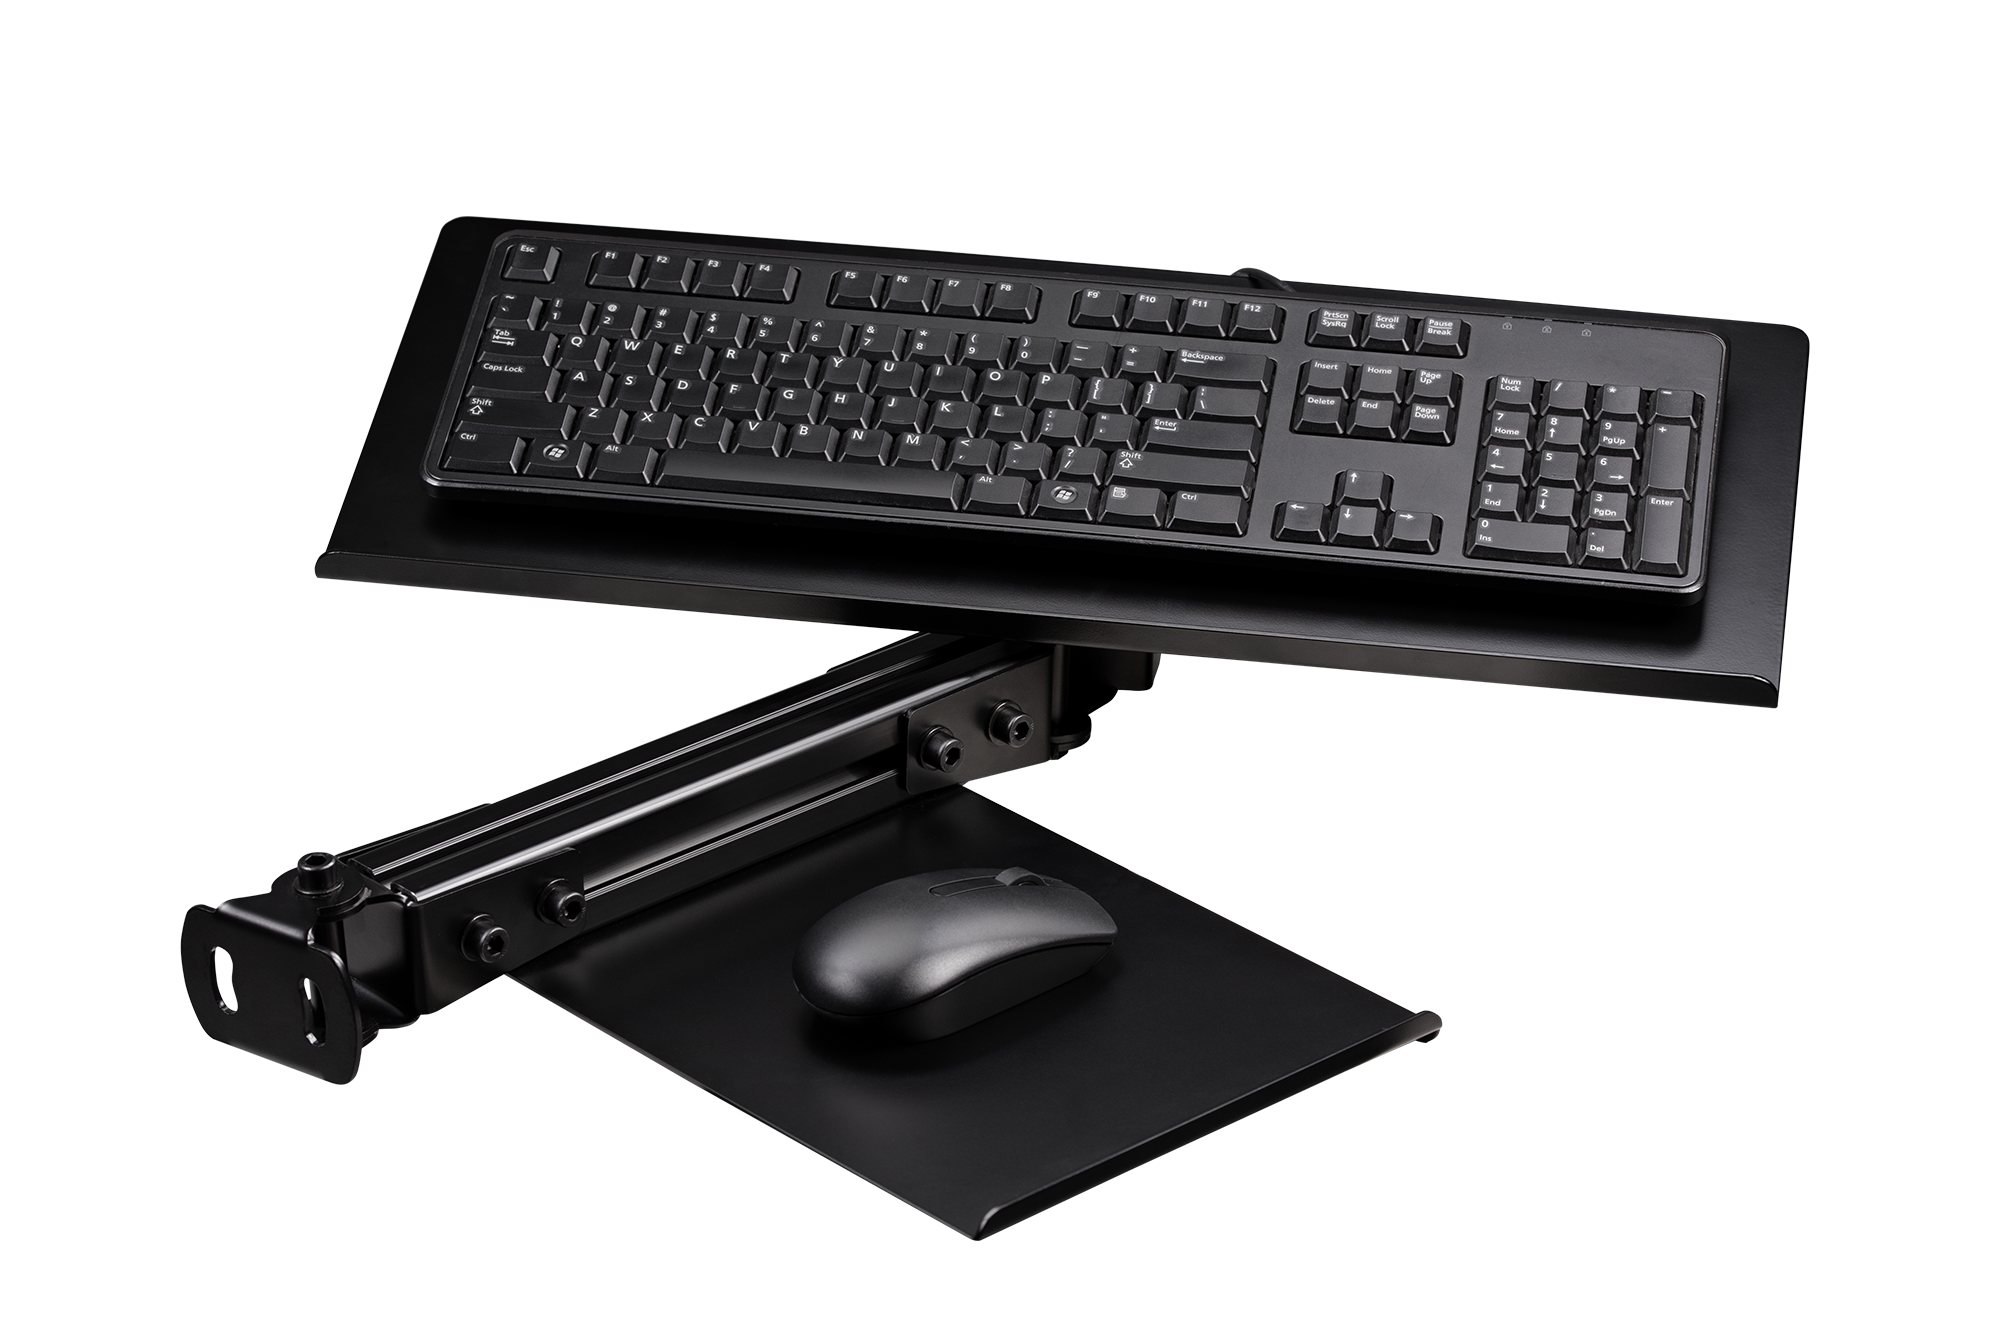 ELITE KEYBOARD AND MOUSE TRAY-Black Edition - Next Level Racing